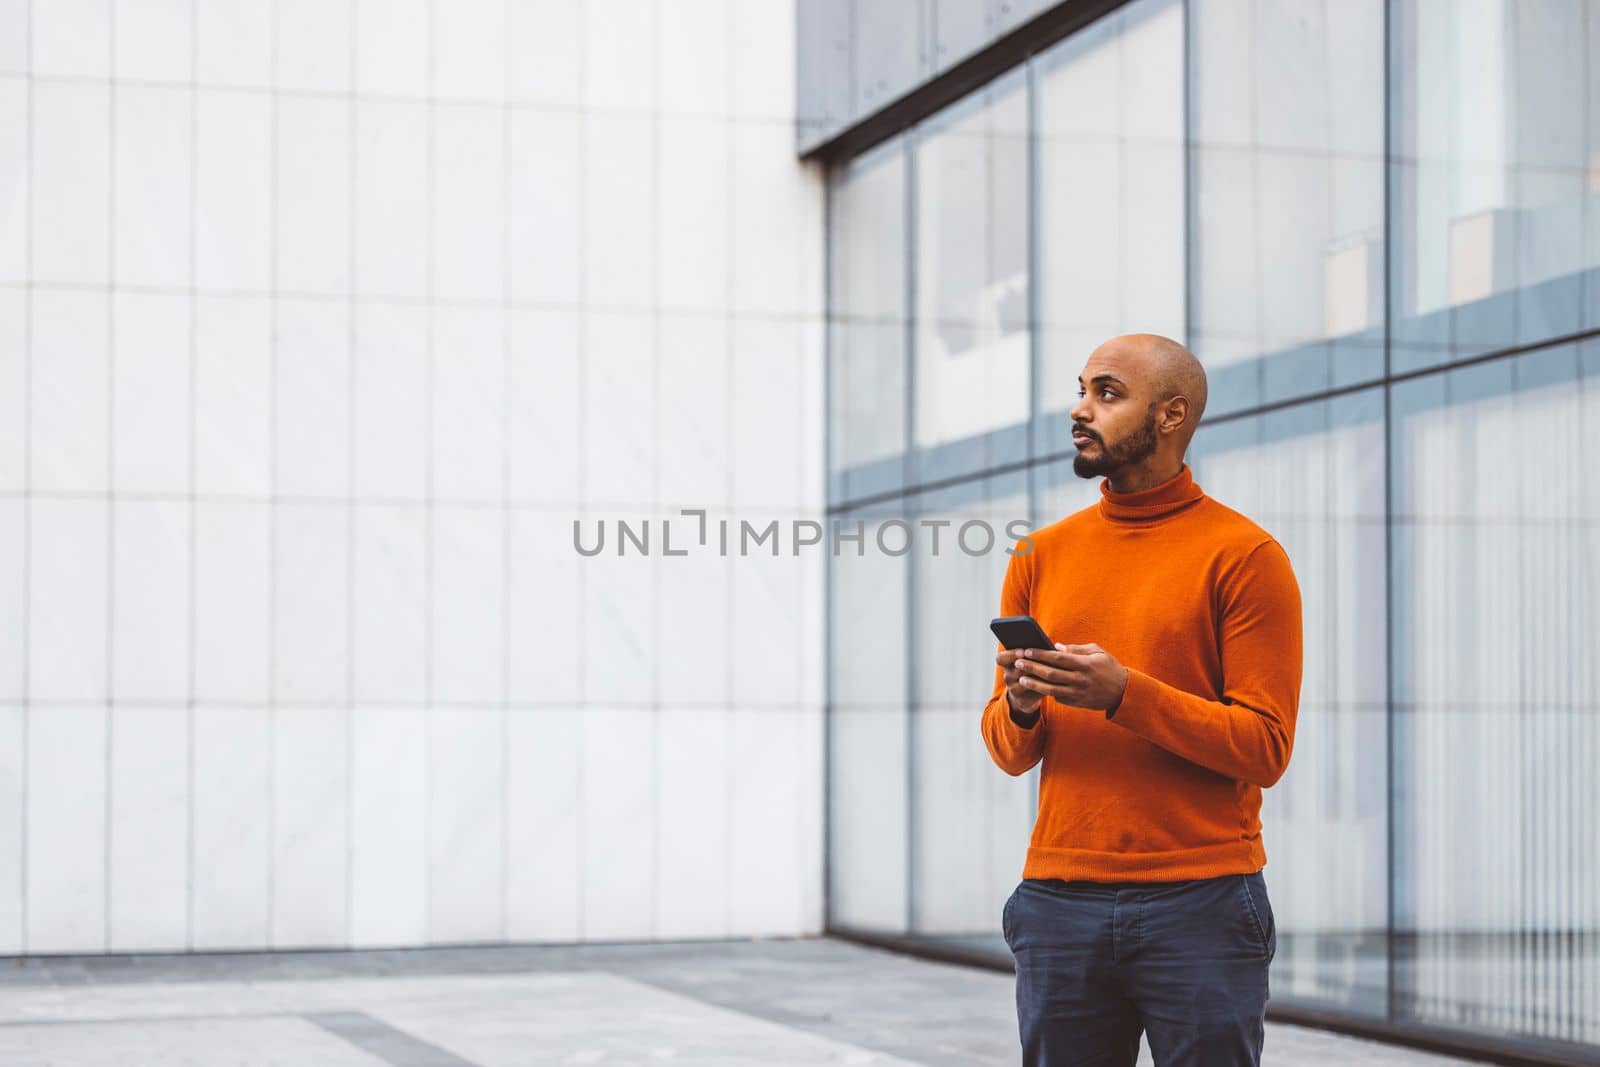 Caucasian man in an orange sweater standing outside in an urban setting holding a digital device, office buildings in the background.